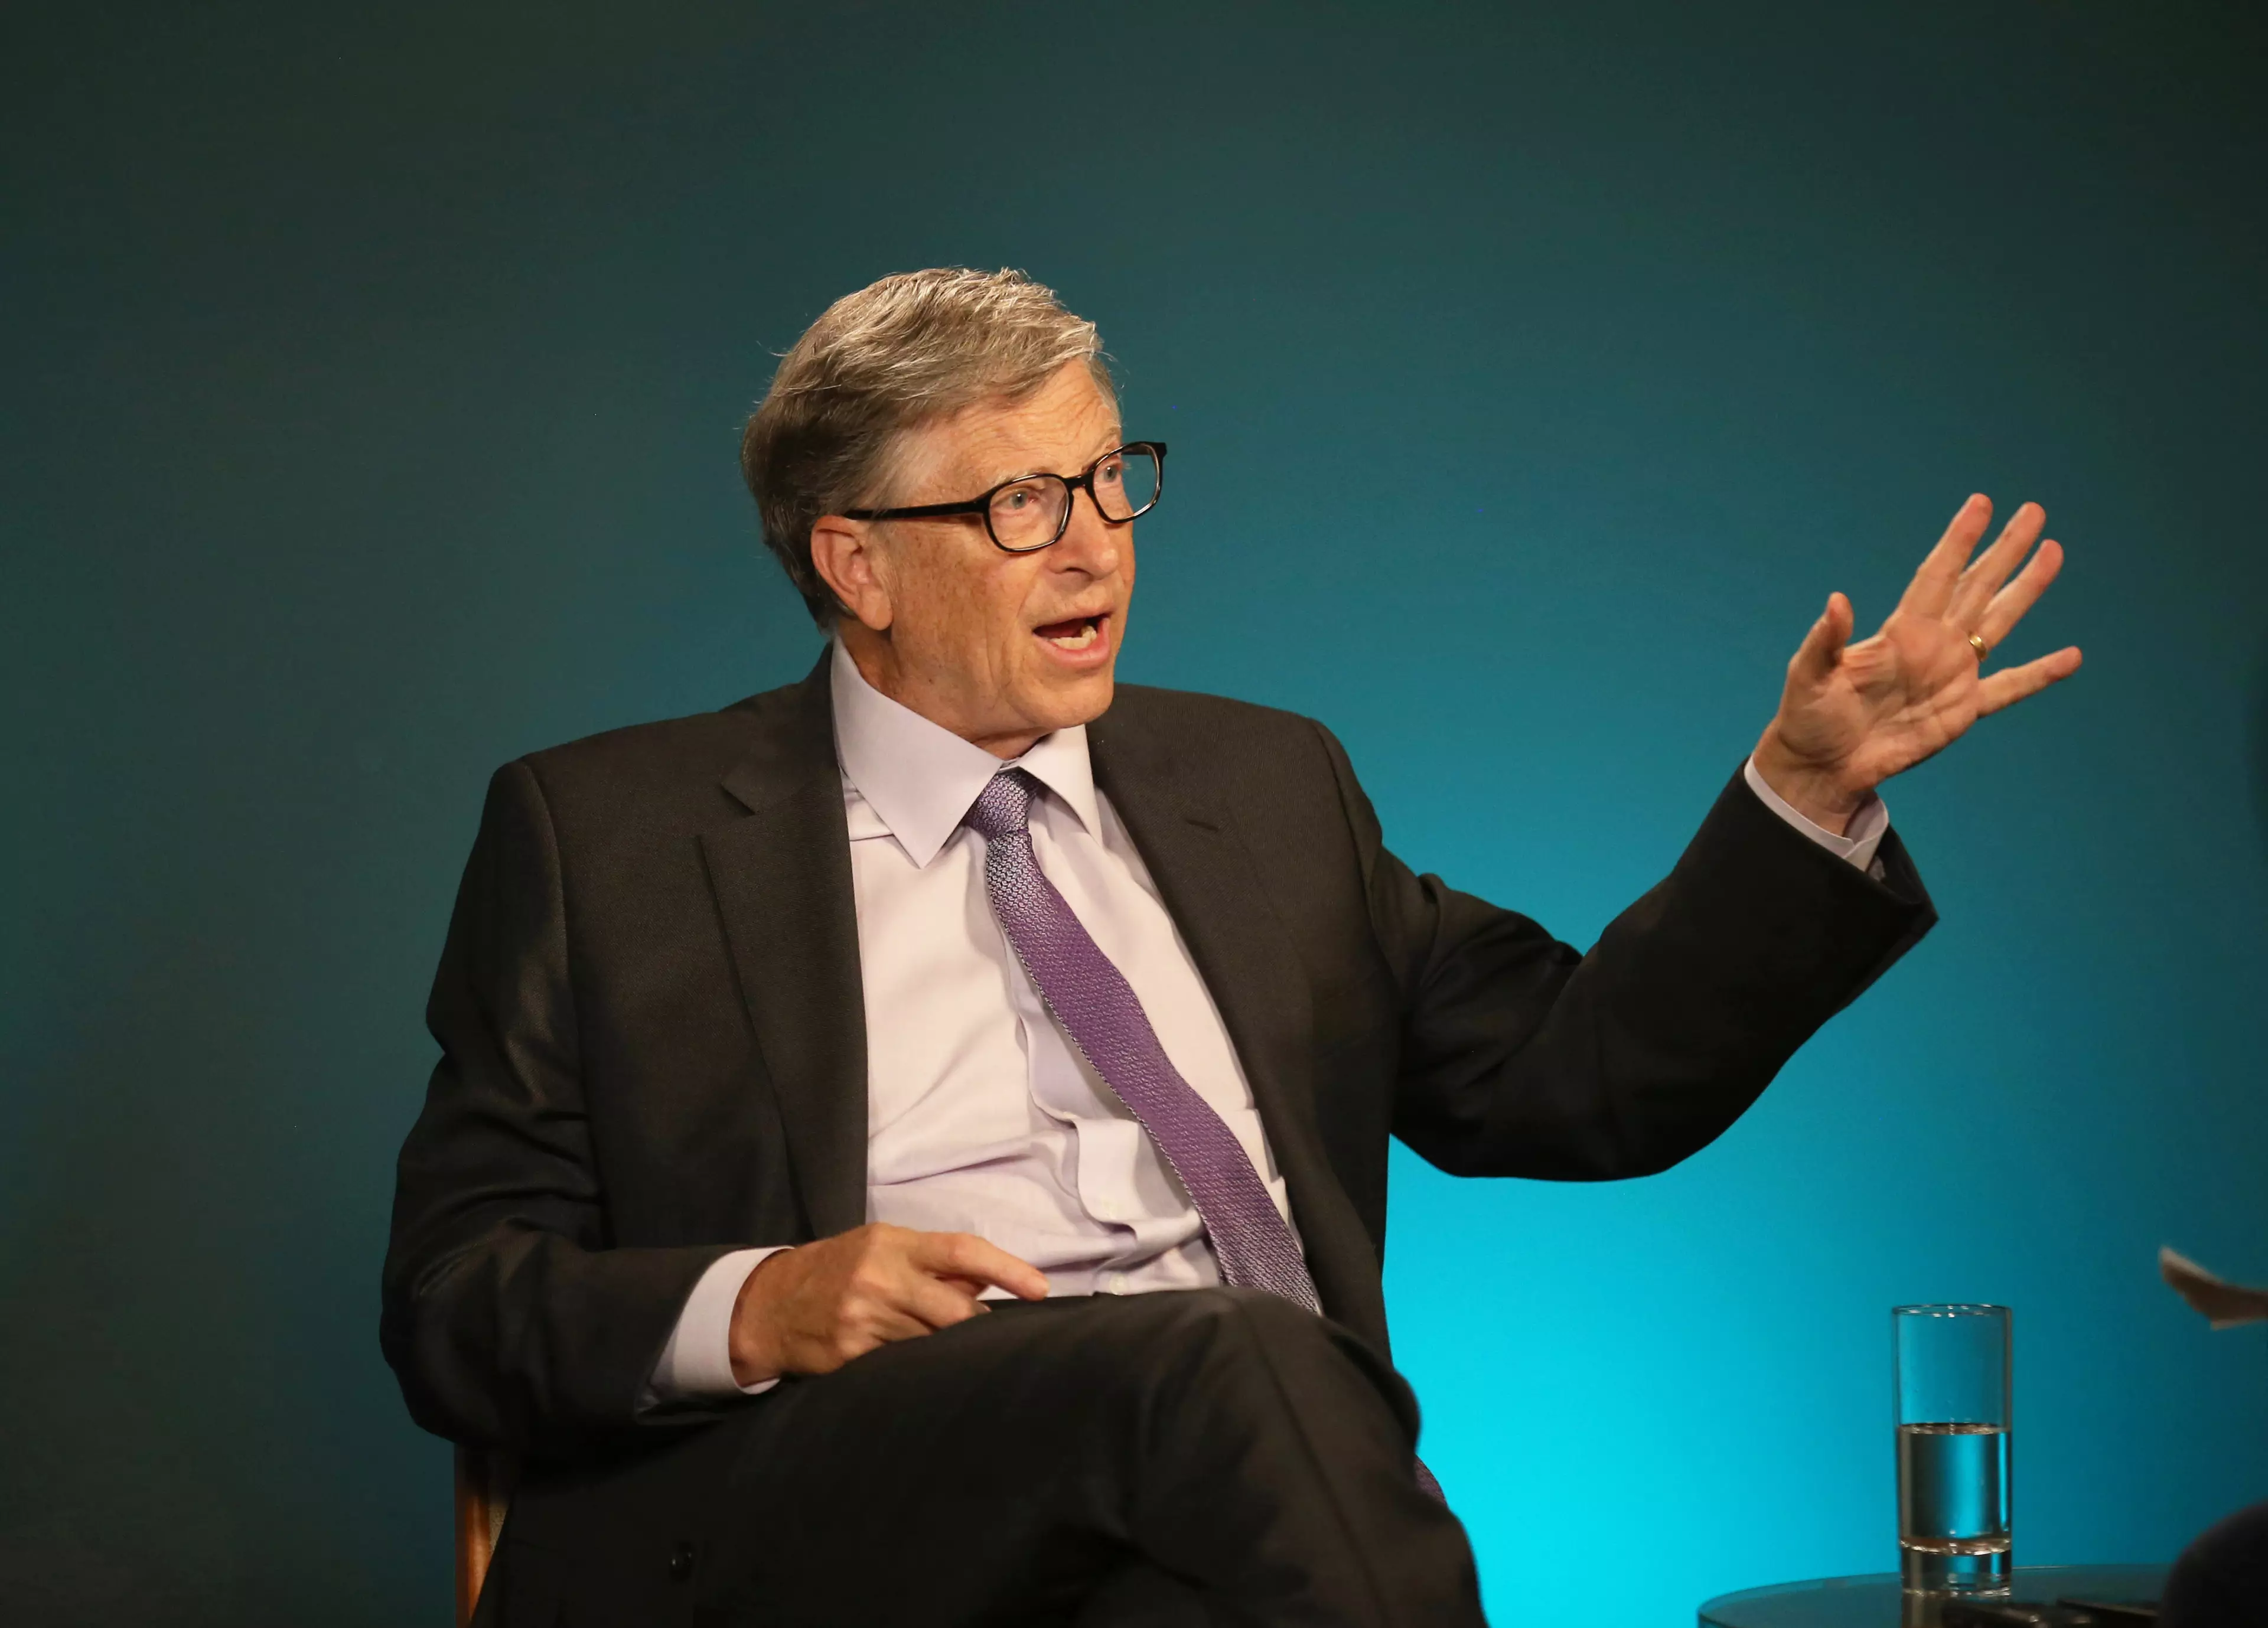 Bill Gates has also been campaigning for higher taxes for the rich.